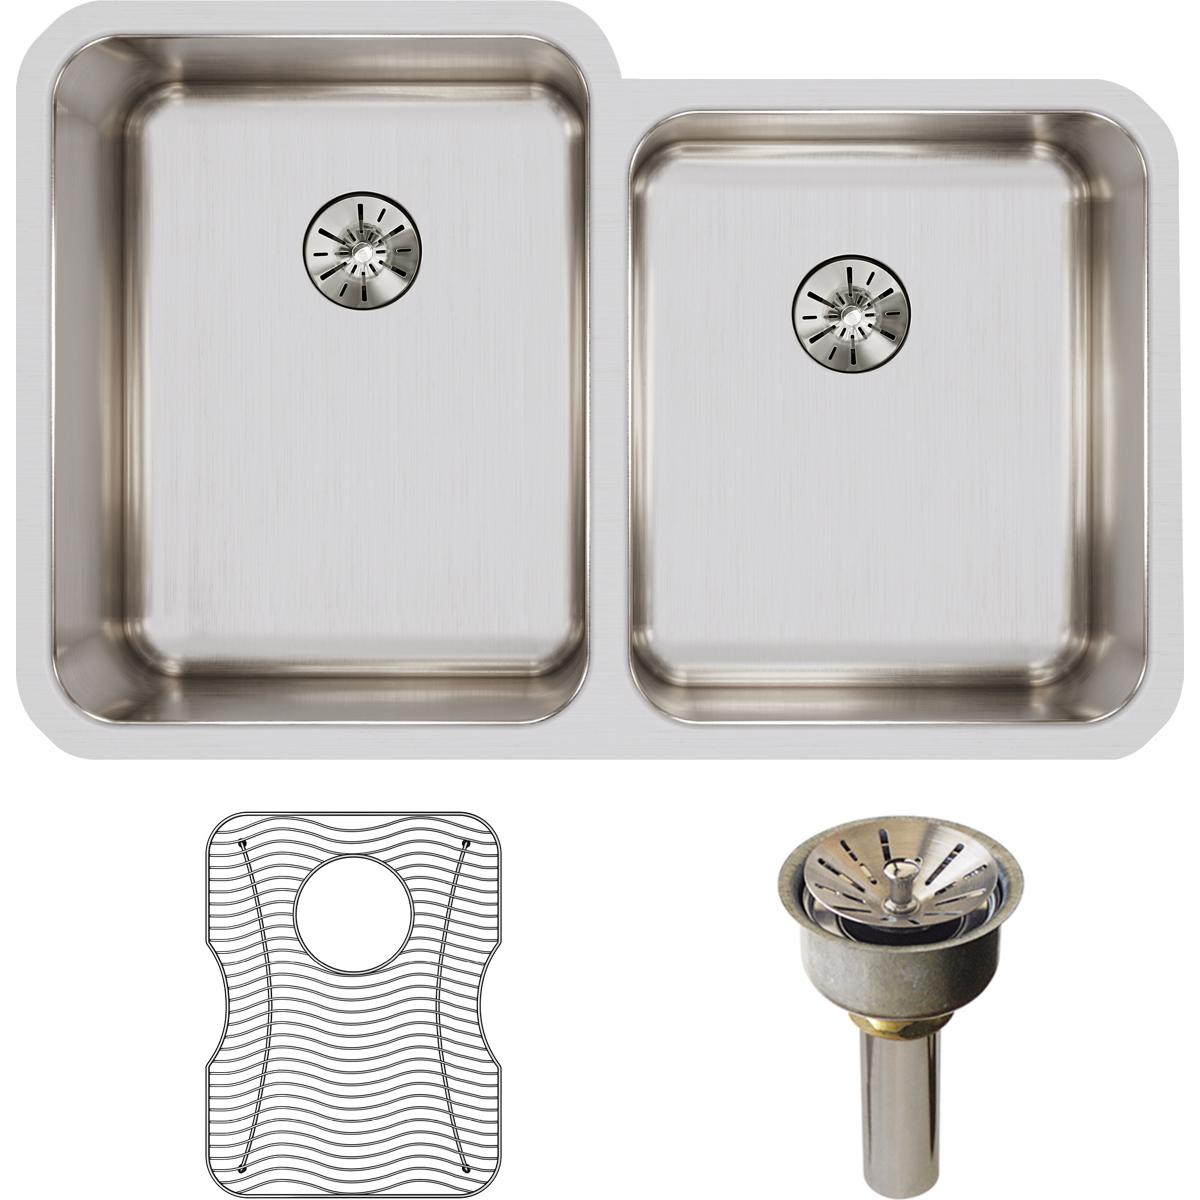 Elkay Lustertone Classic Stainless Steel 31-1/4" x 20-1/2" x 9-7/8" Double Bowl Undermount Sink Kit with Perfect Drain